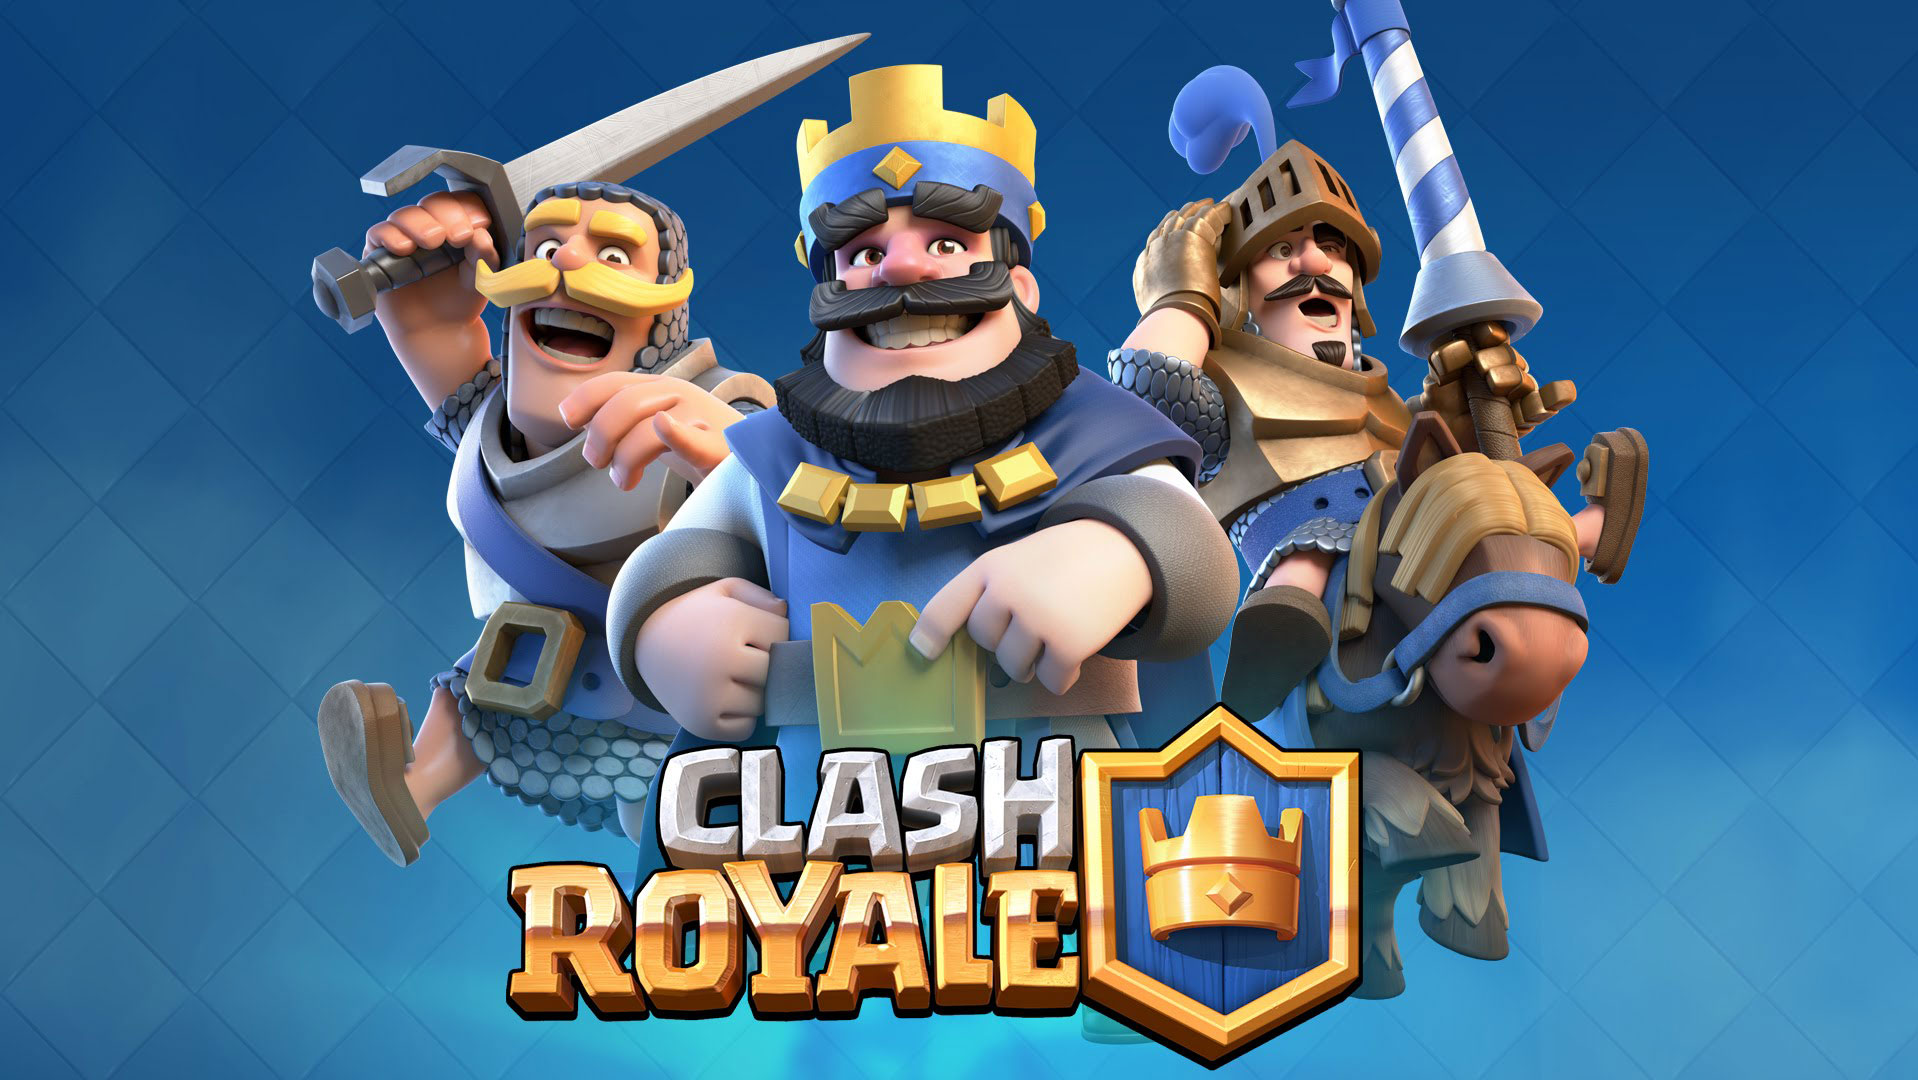 Wallpaper Clash Royale, 2016 game, mobile game